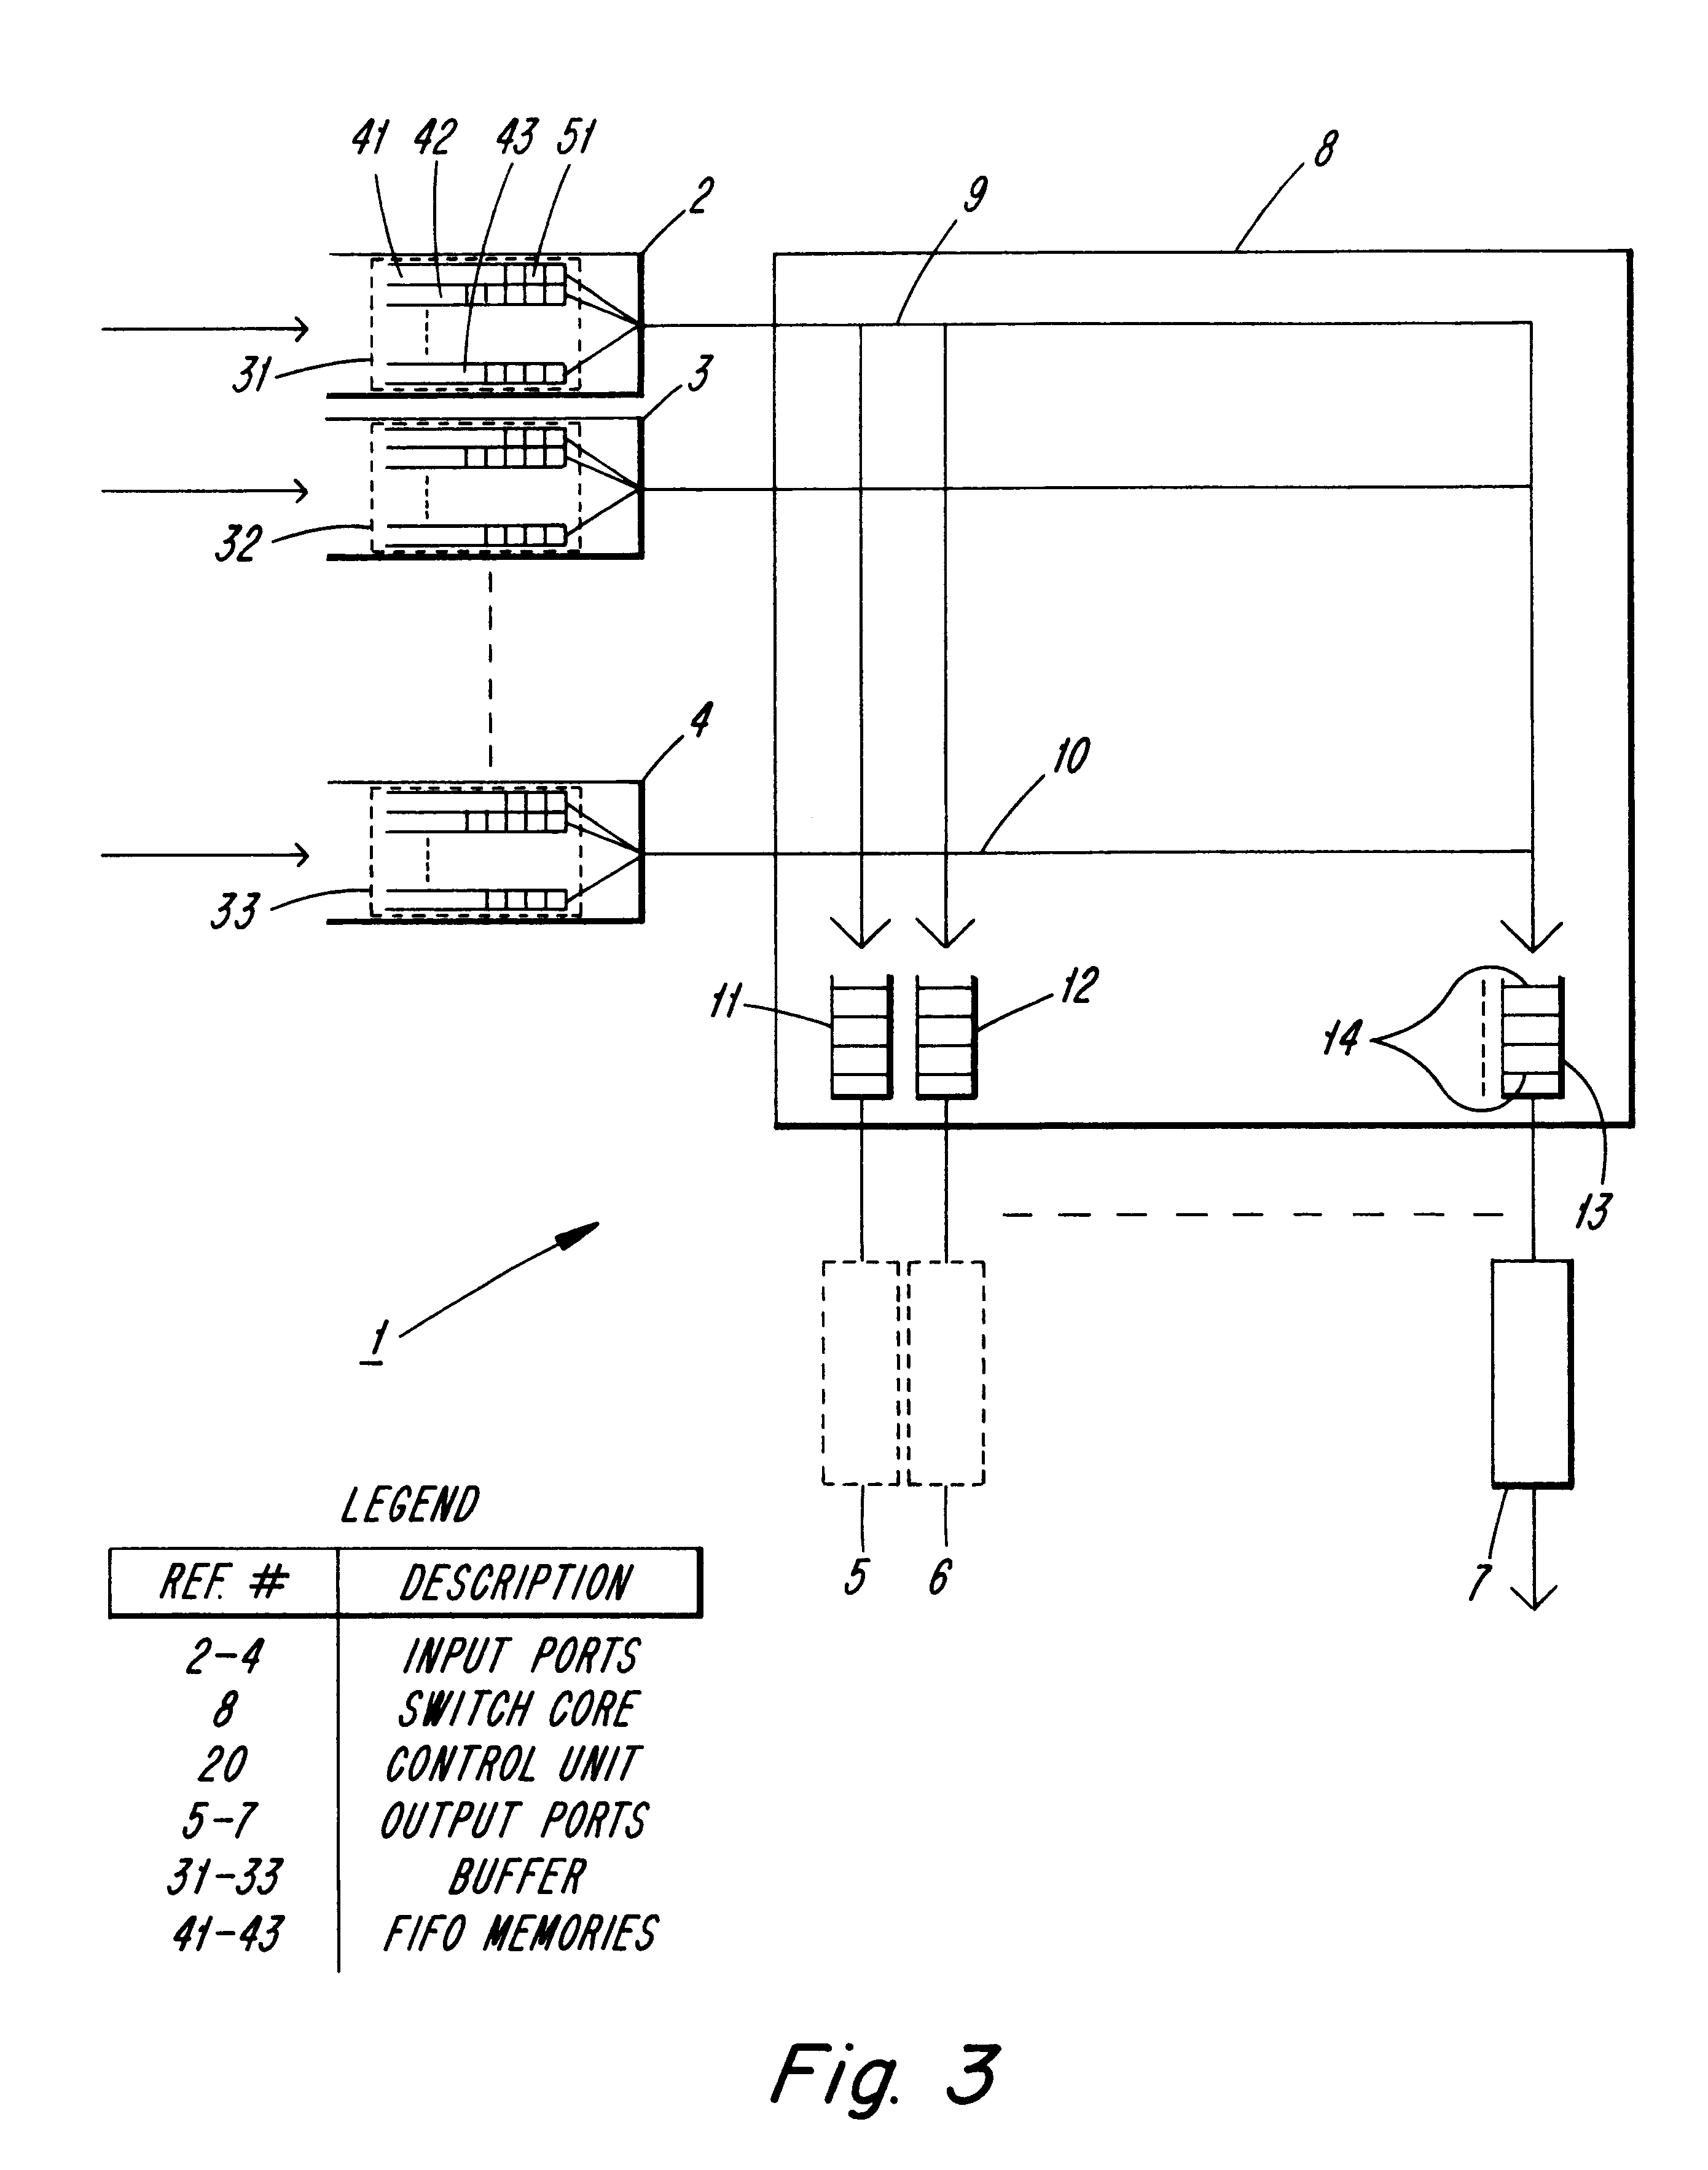 Flow control for switching